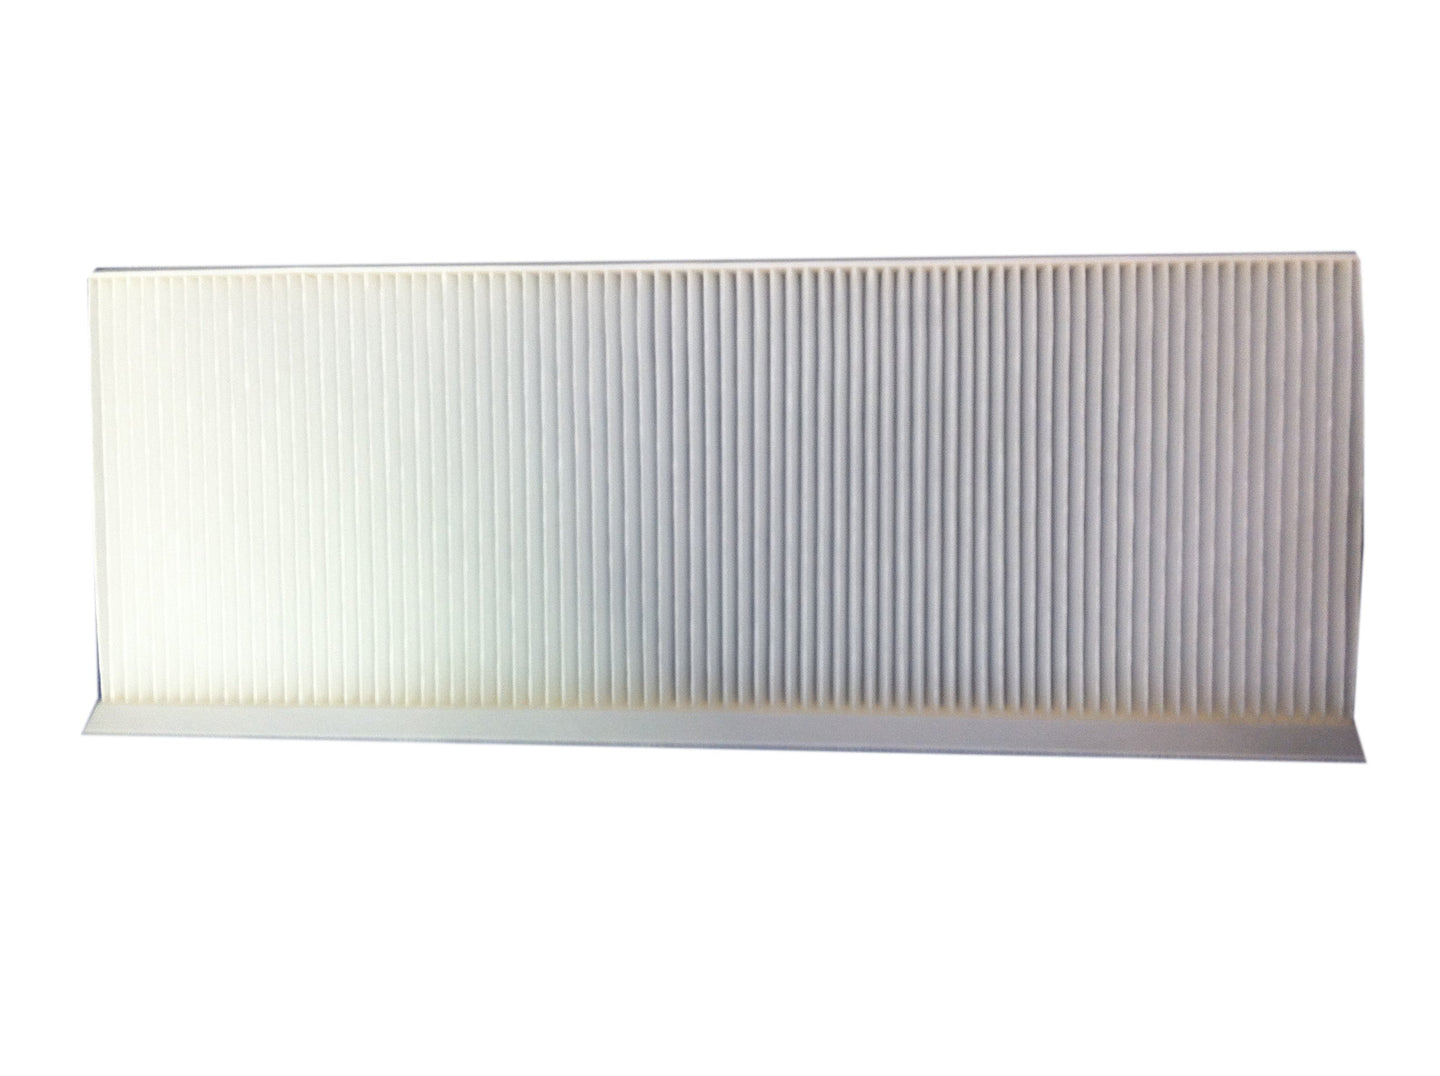 CHEVROLET CABIN AIR FILTERS Alliance Auto Products